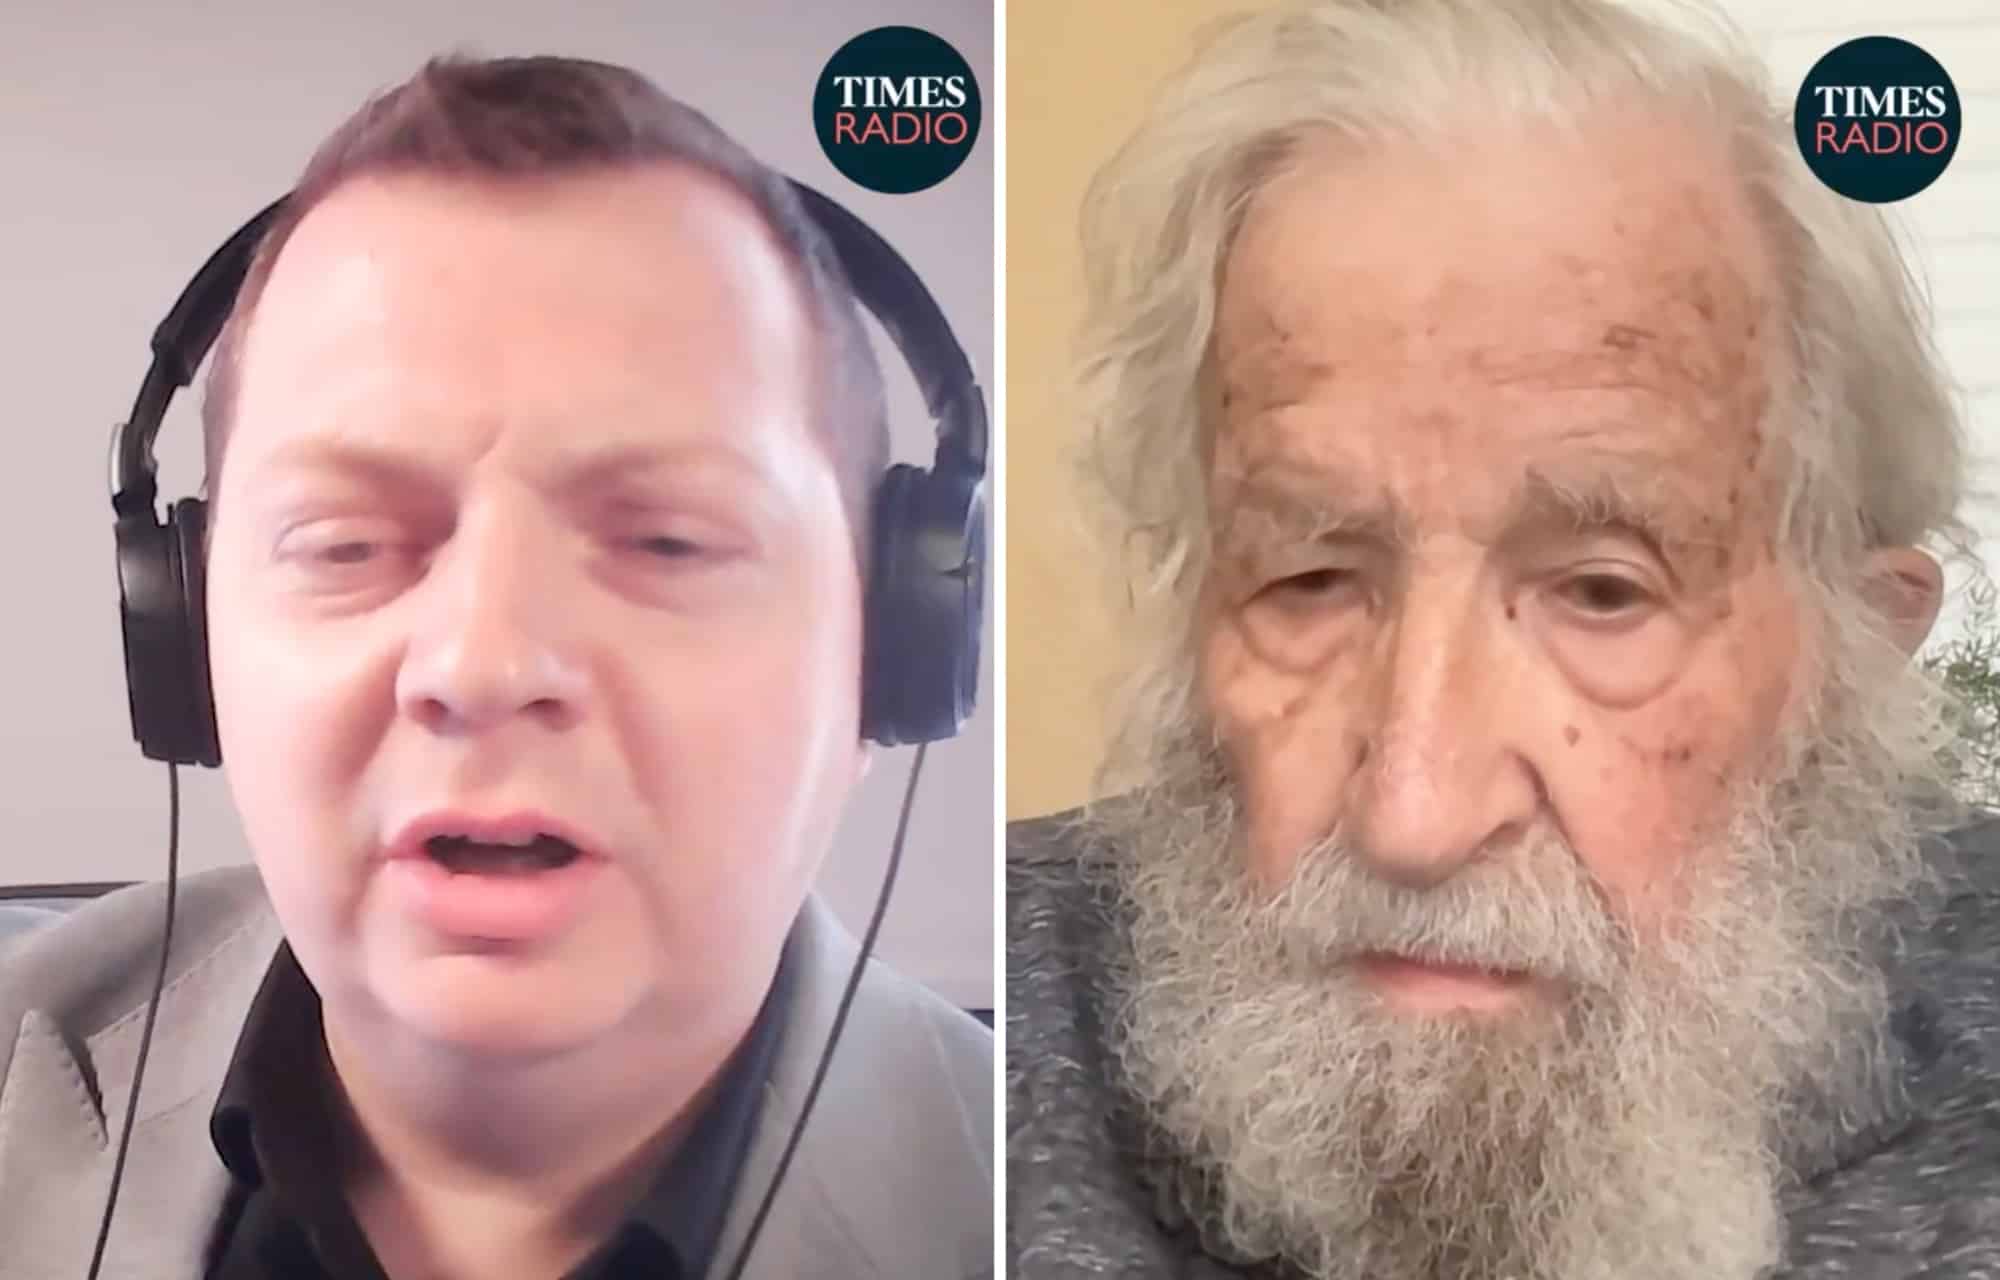 Watch: Chomsky clashes with Times Radio over Corbyn’s record